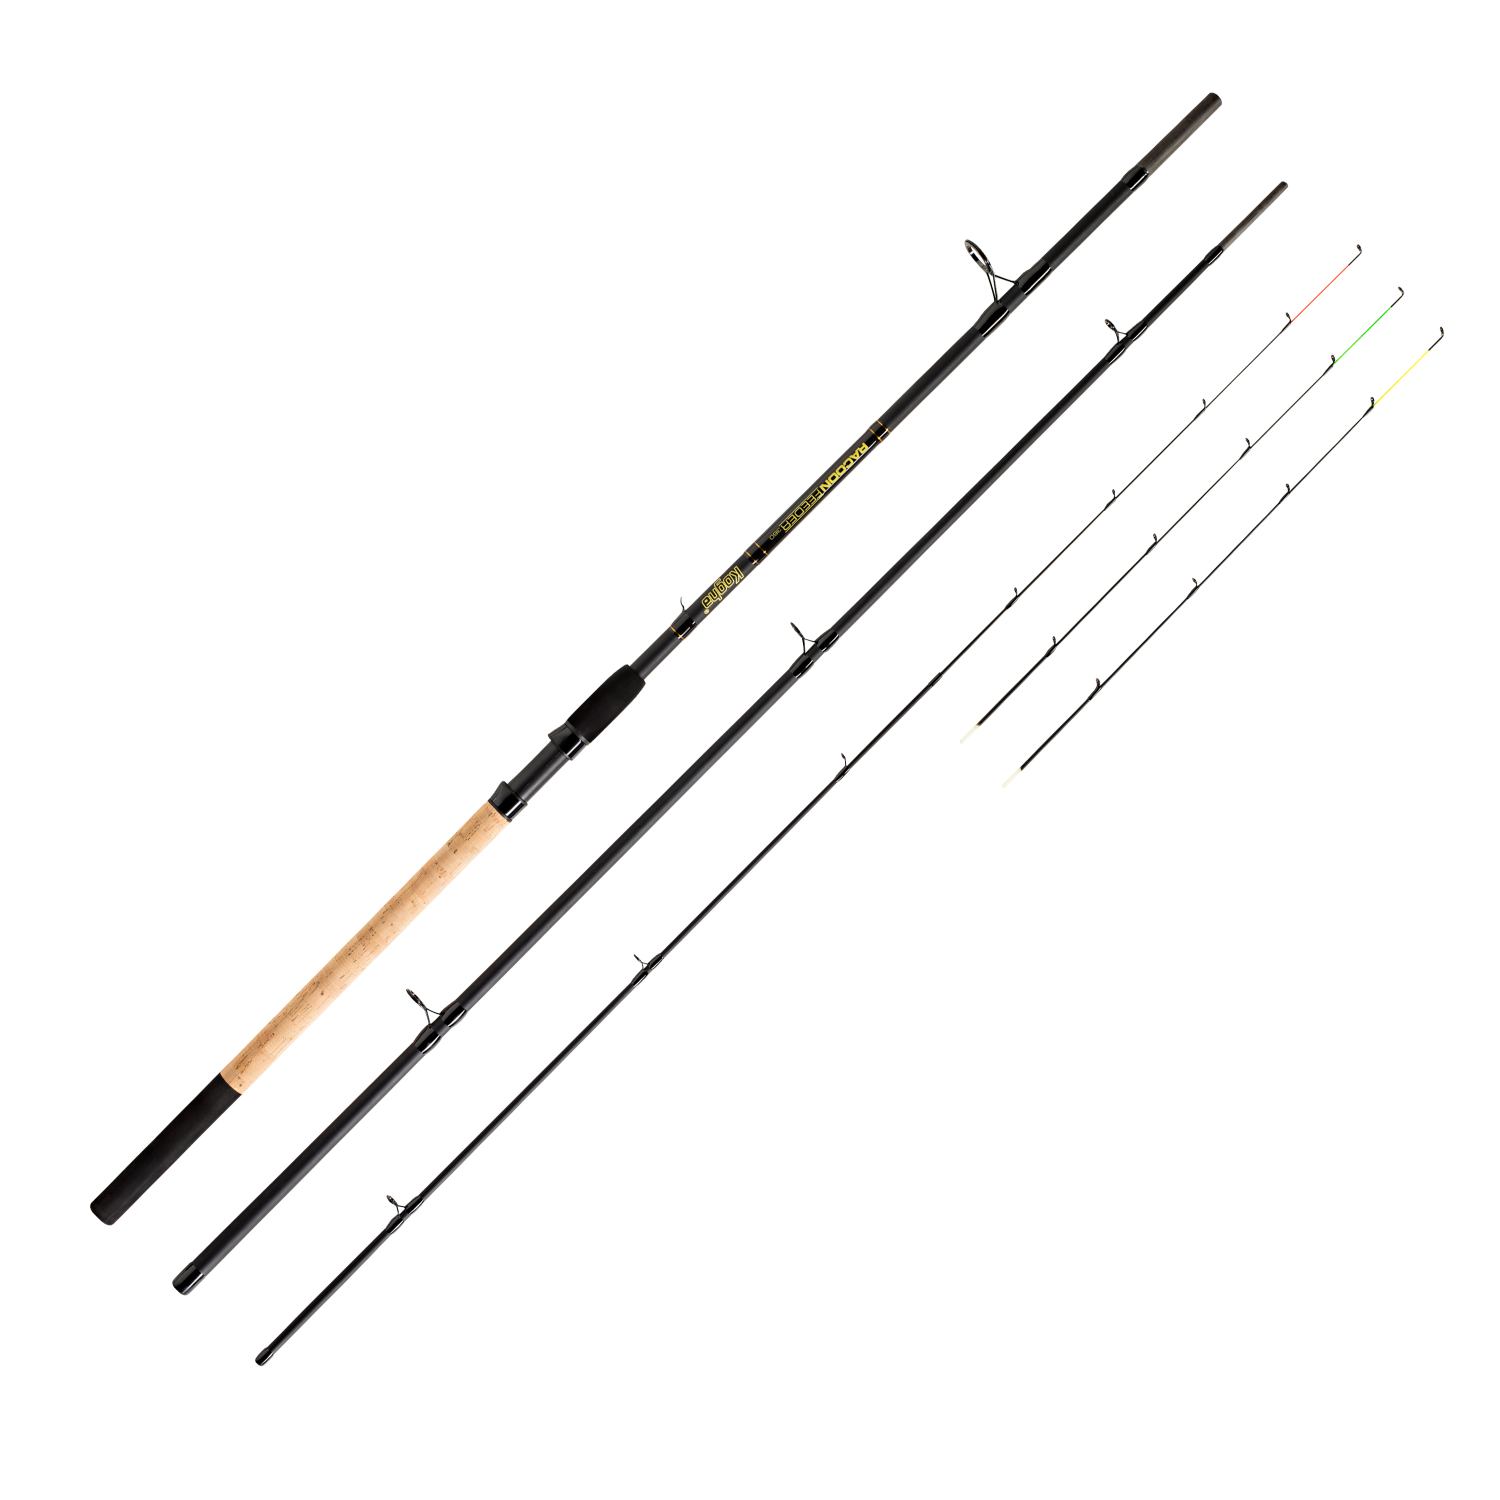 Kogha Fishing Rod Racoon Feeder at low prices